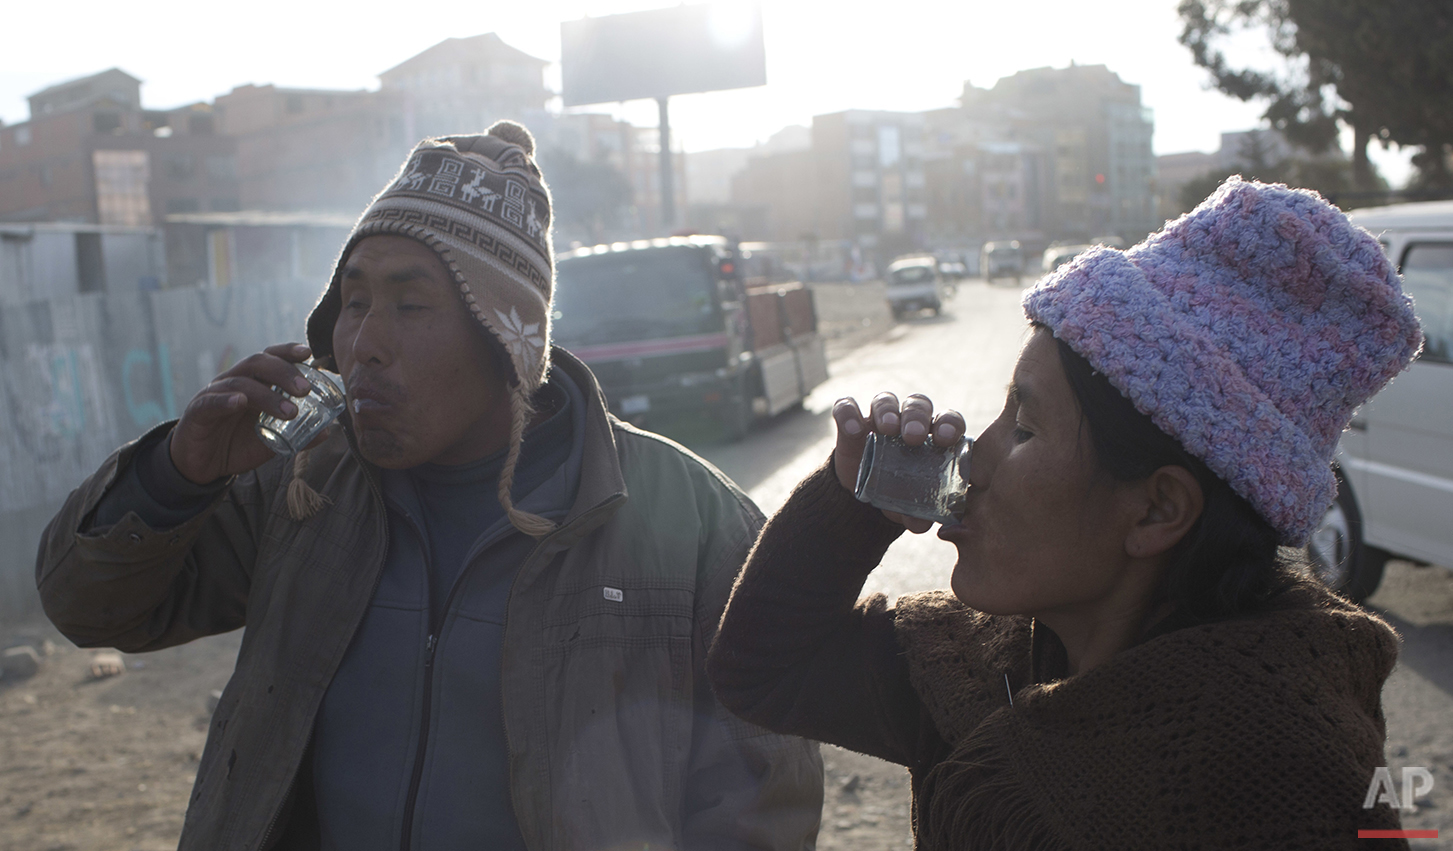  In this June 8, 2016 photo, Lorenzo Saldias and his wife drink donkey milk from a vendor in the streets of El Alto, Bolivia. "Donkey milk is medicine that heals," Salvias said. "I had pneumonia, my back hurt and I had the chills. Now it's taking eff